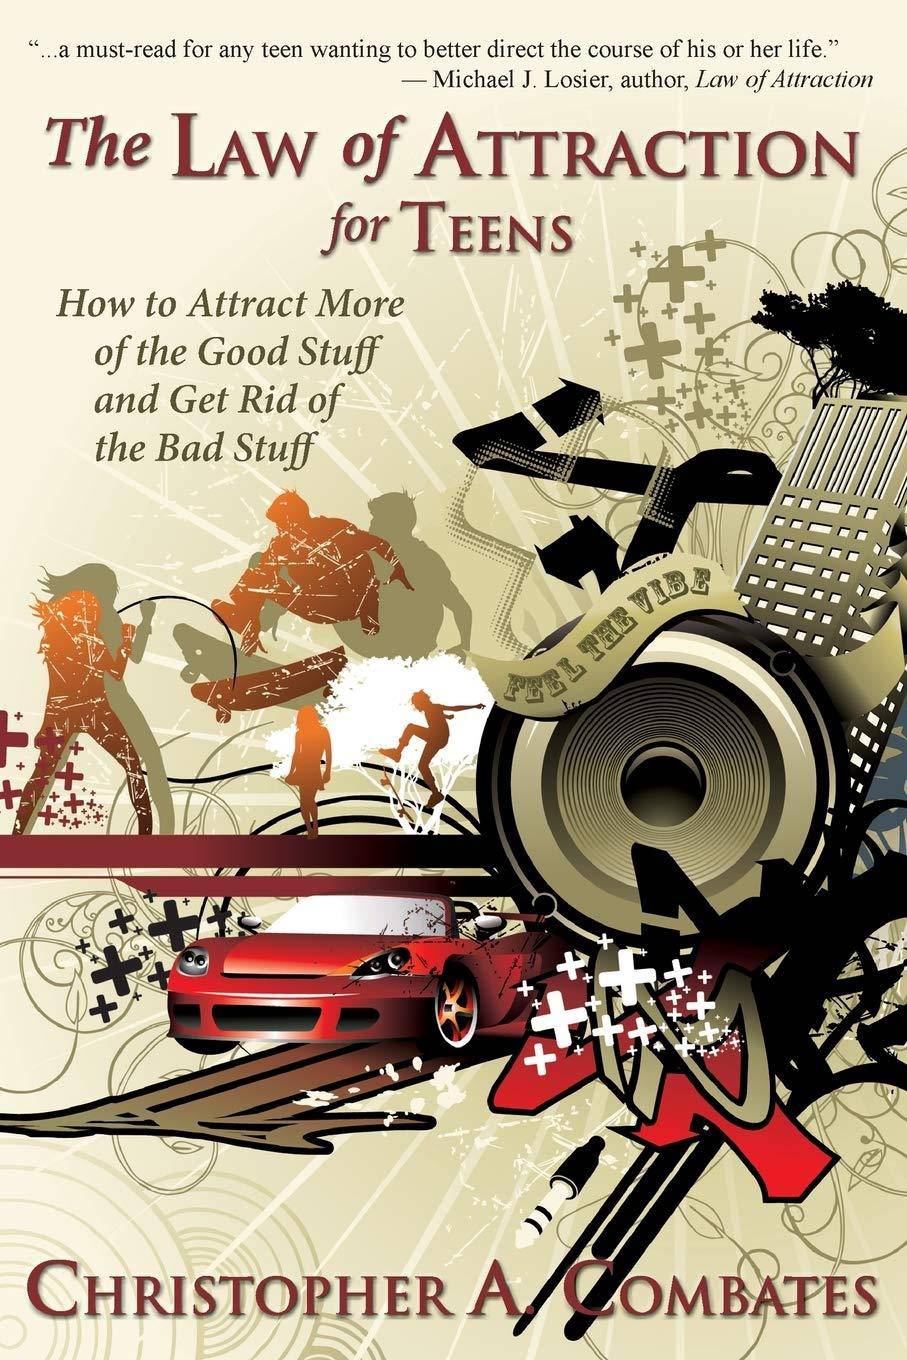 The Law of Attraction for Teens - SureShot Books Publishing LLC